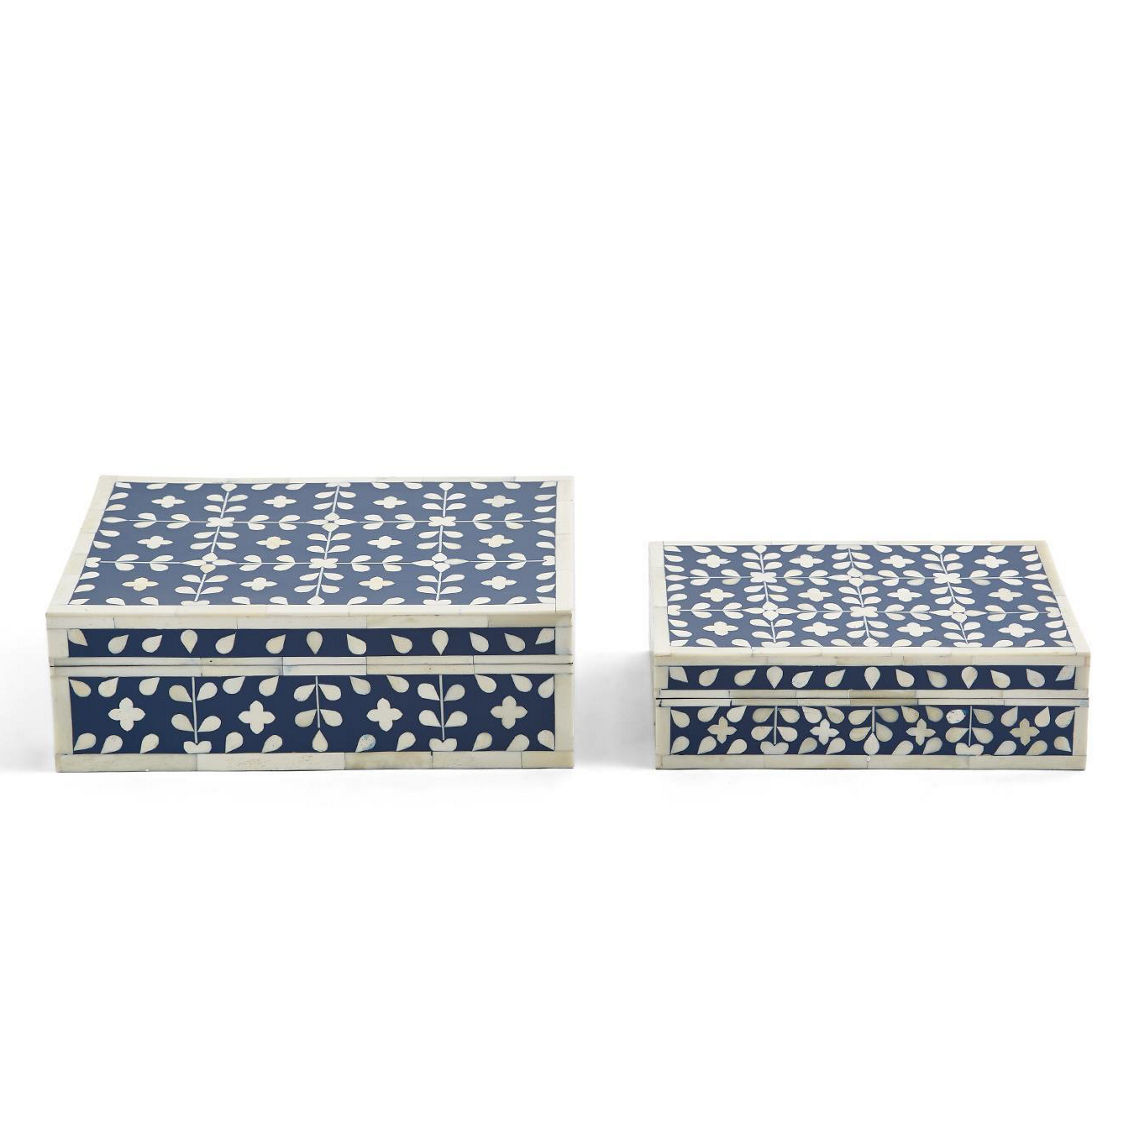 Tozai S/2 Flower and Petals Blue/White Tear Cover Box - Image 3 of 4